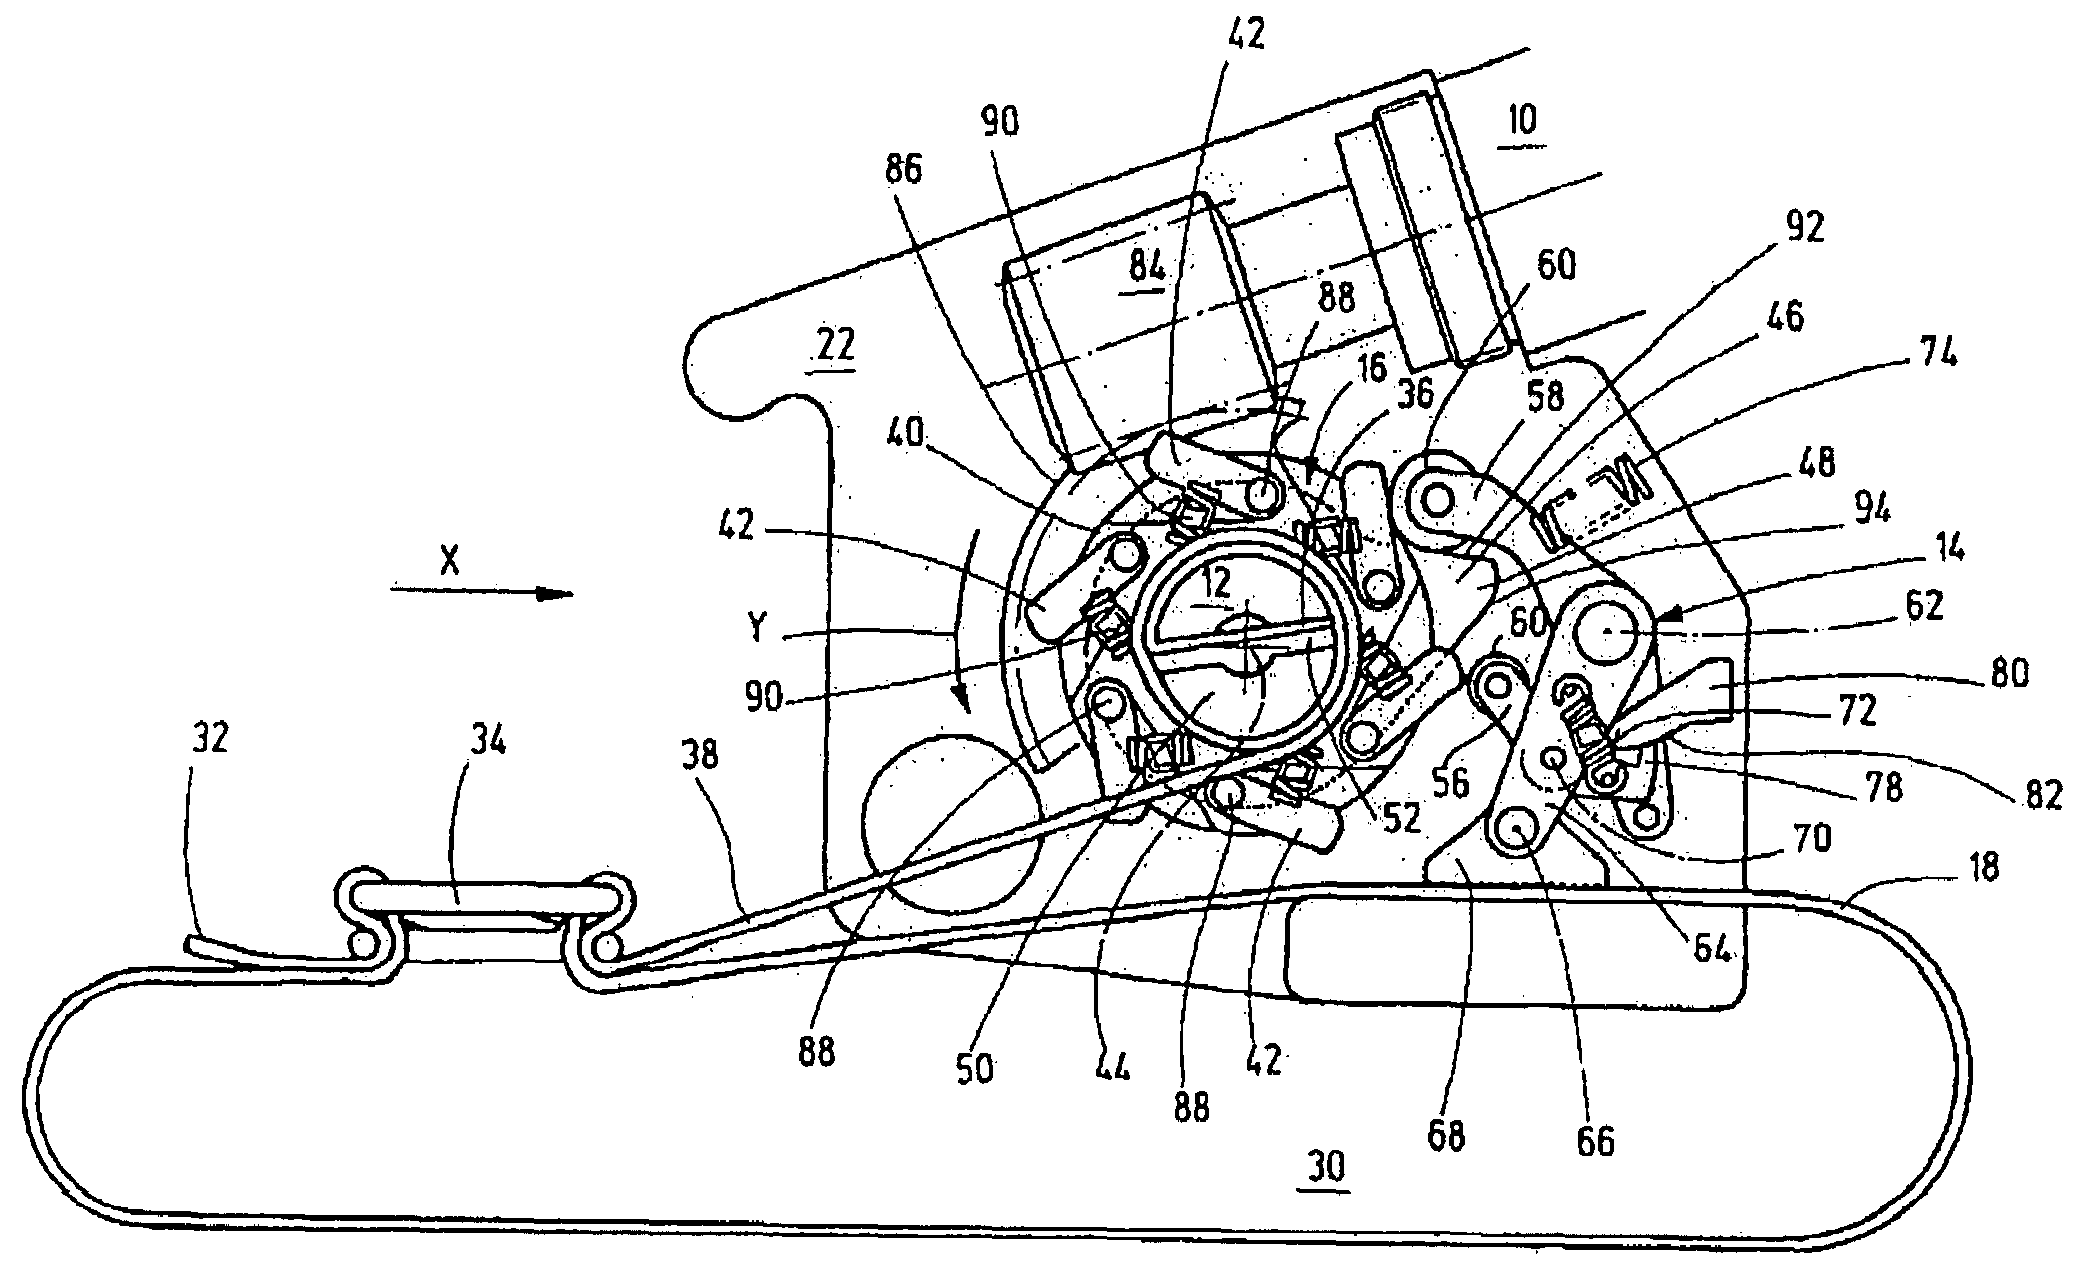 Apparatus for tensioning a band